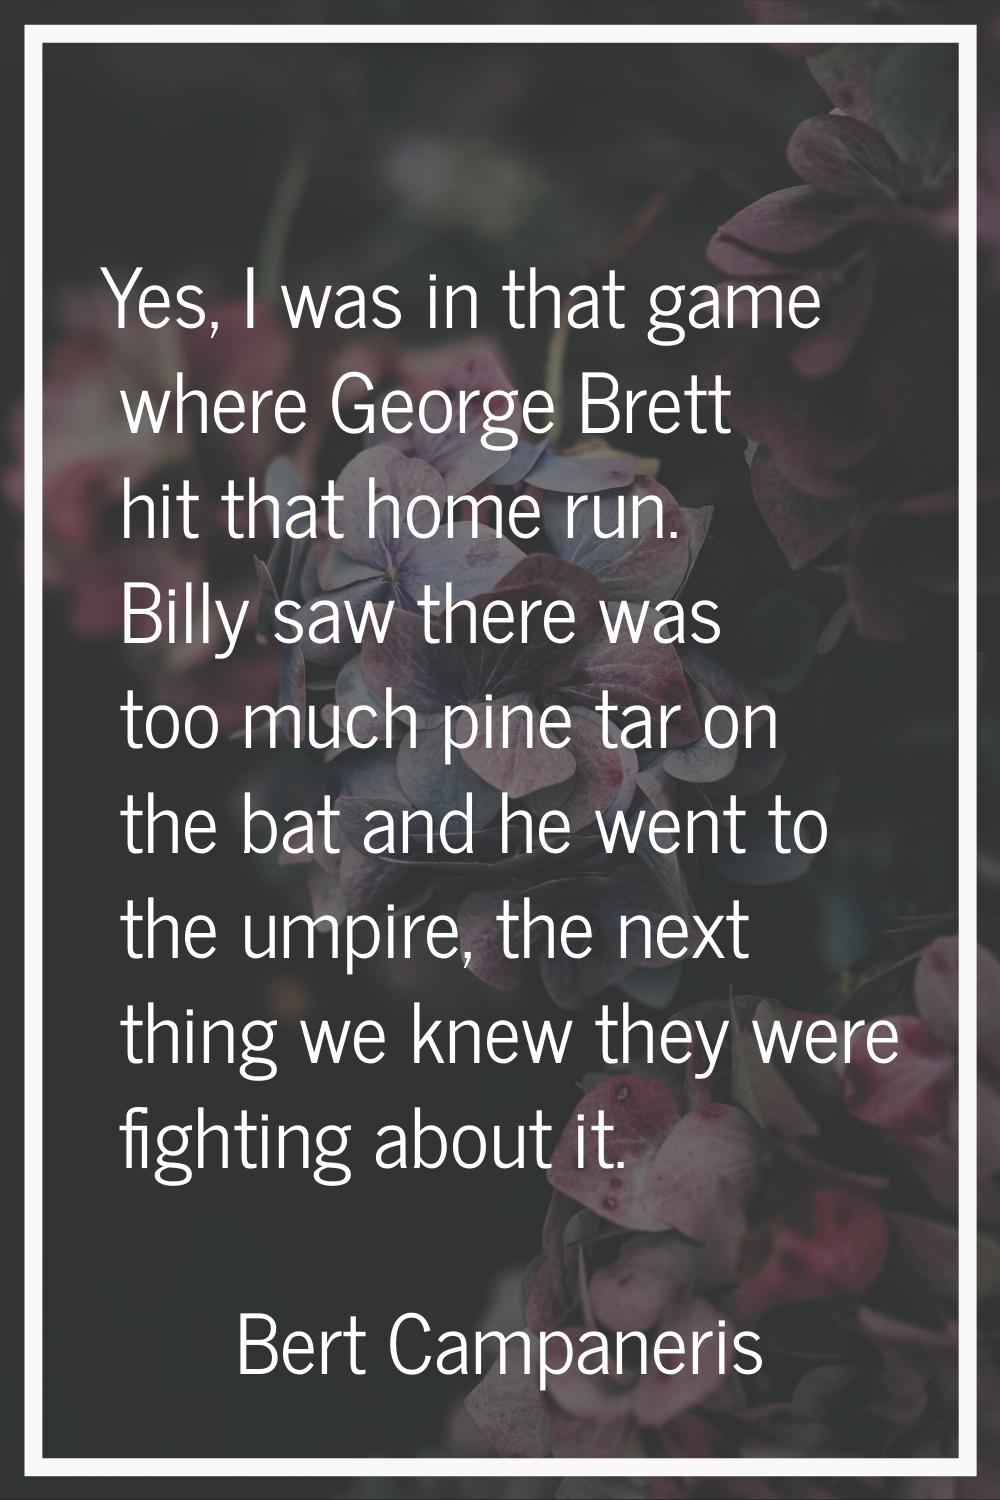 Yes, I was in that game where George Brett hit that home run. Billy saw there was too much pine tar